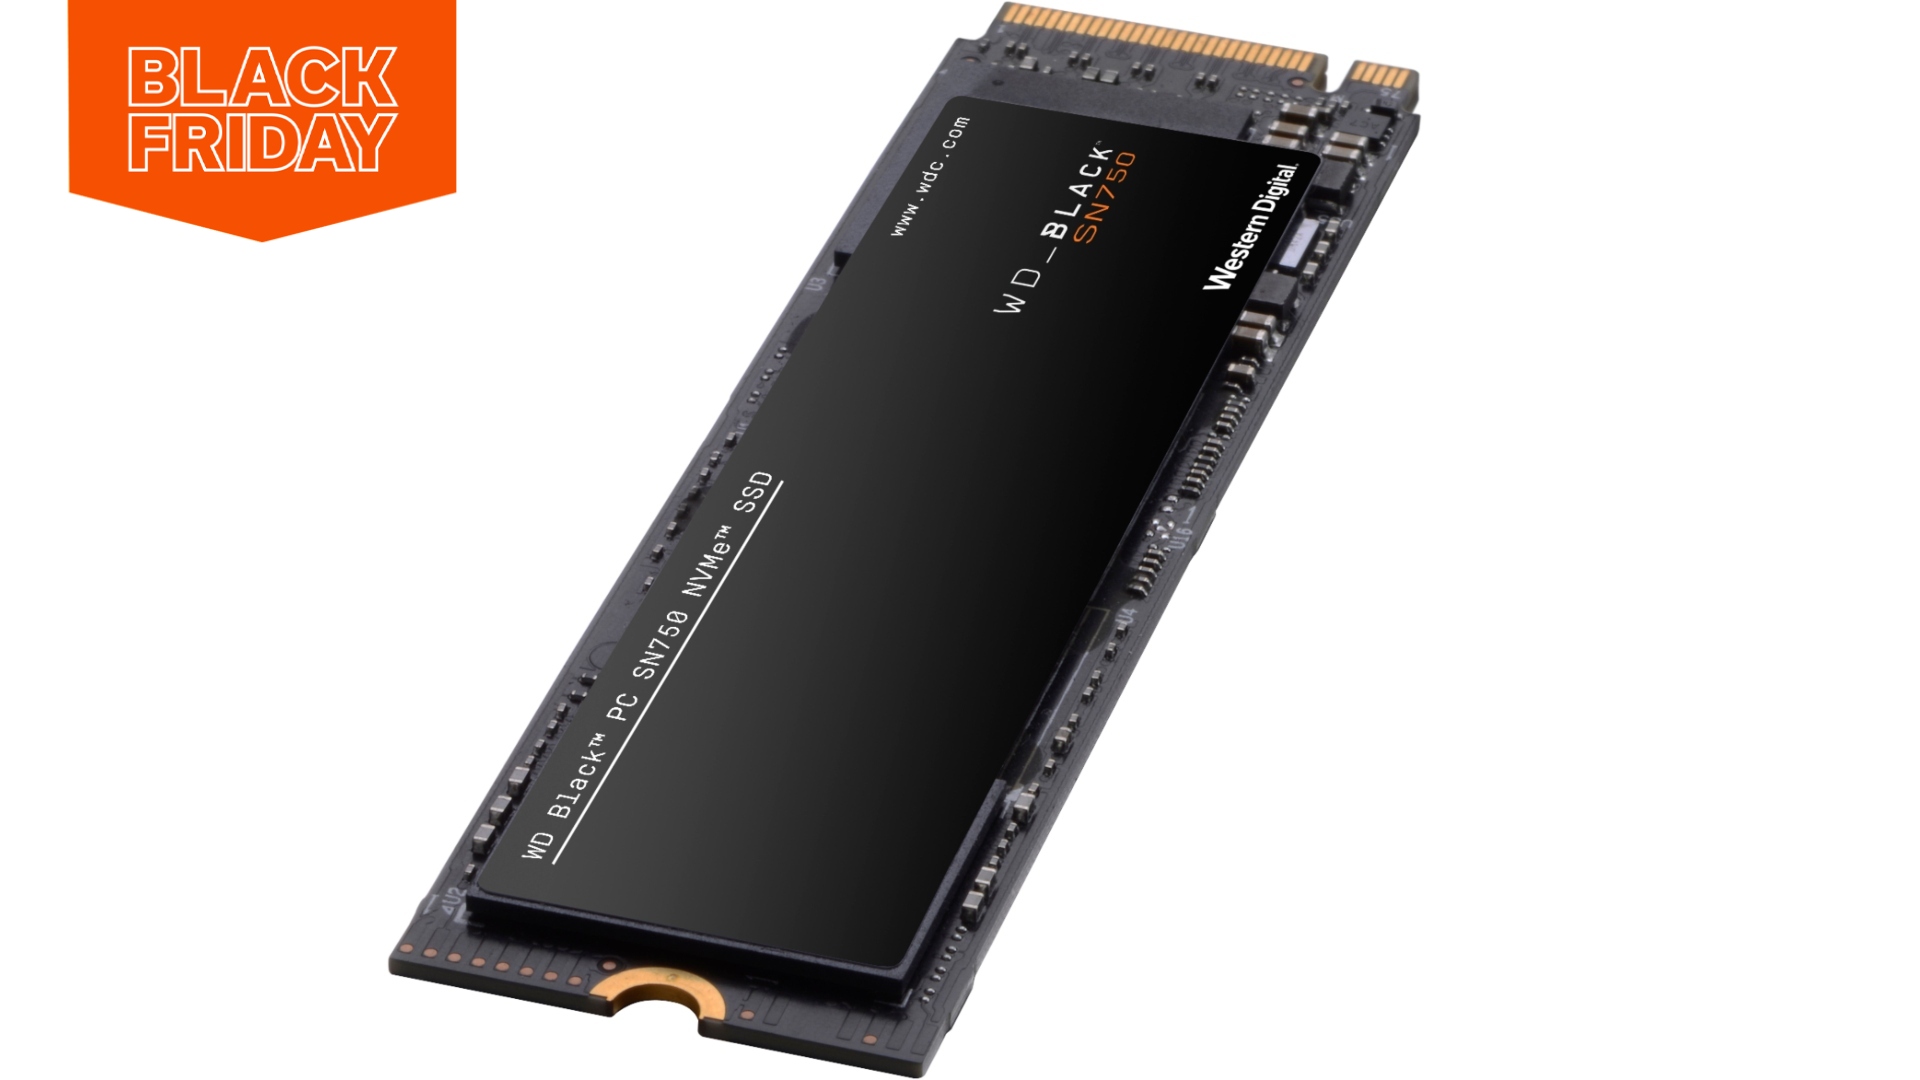 WD SN750 2TB SSD reduced by $280 in early Black Friday deals